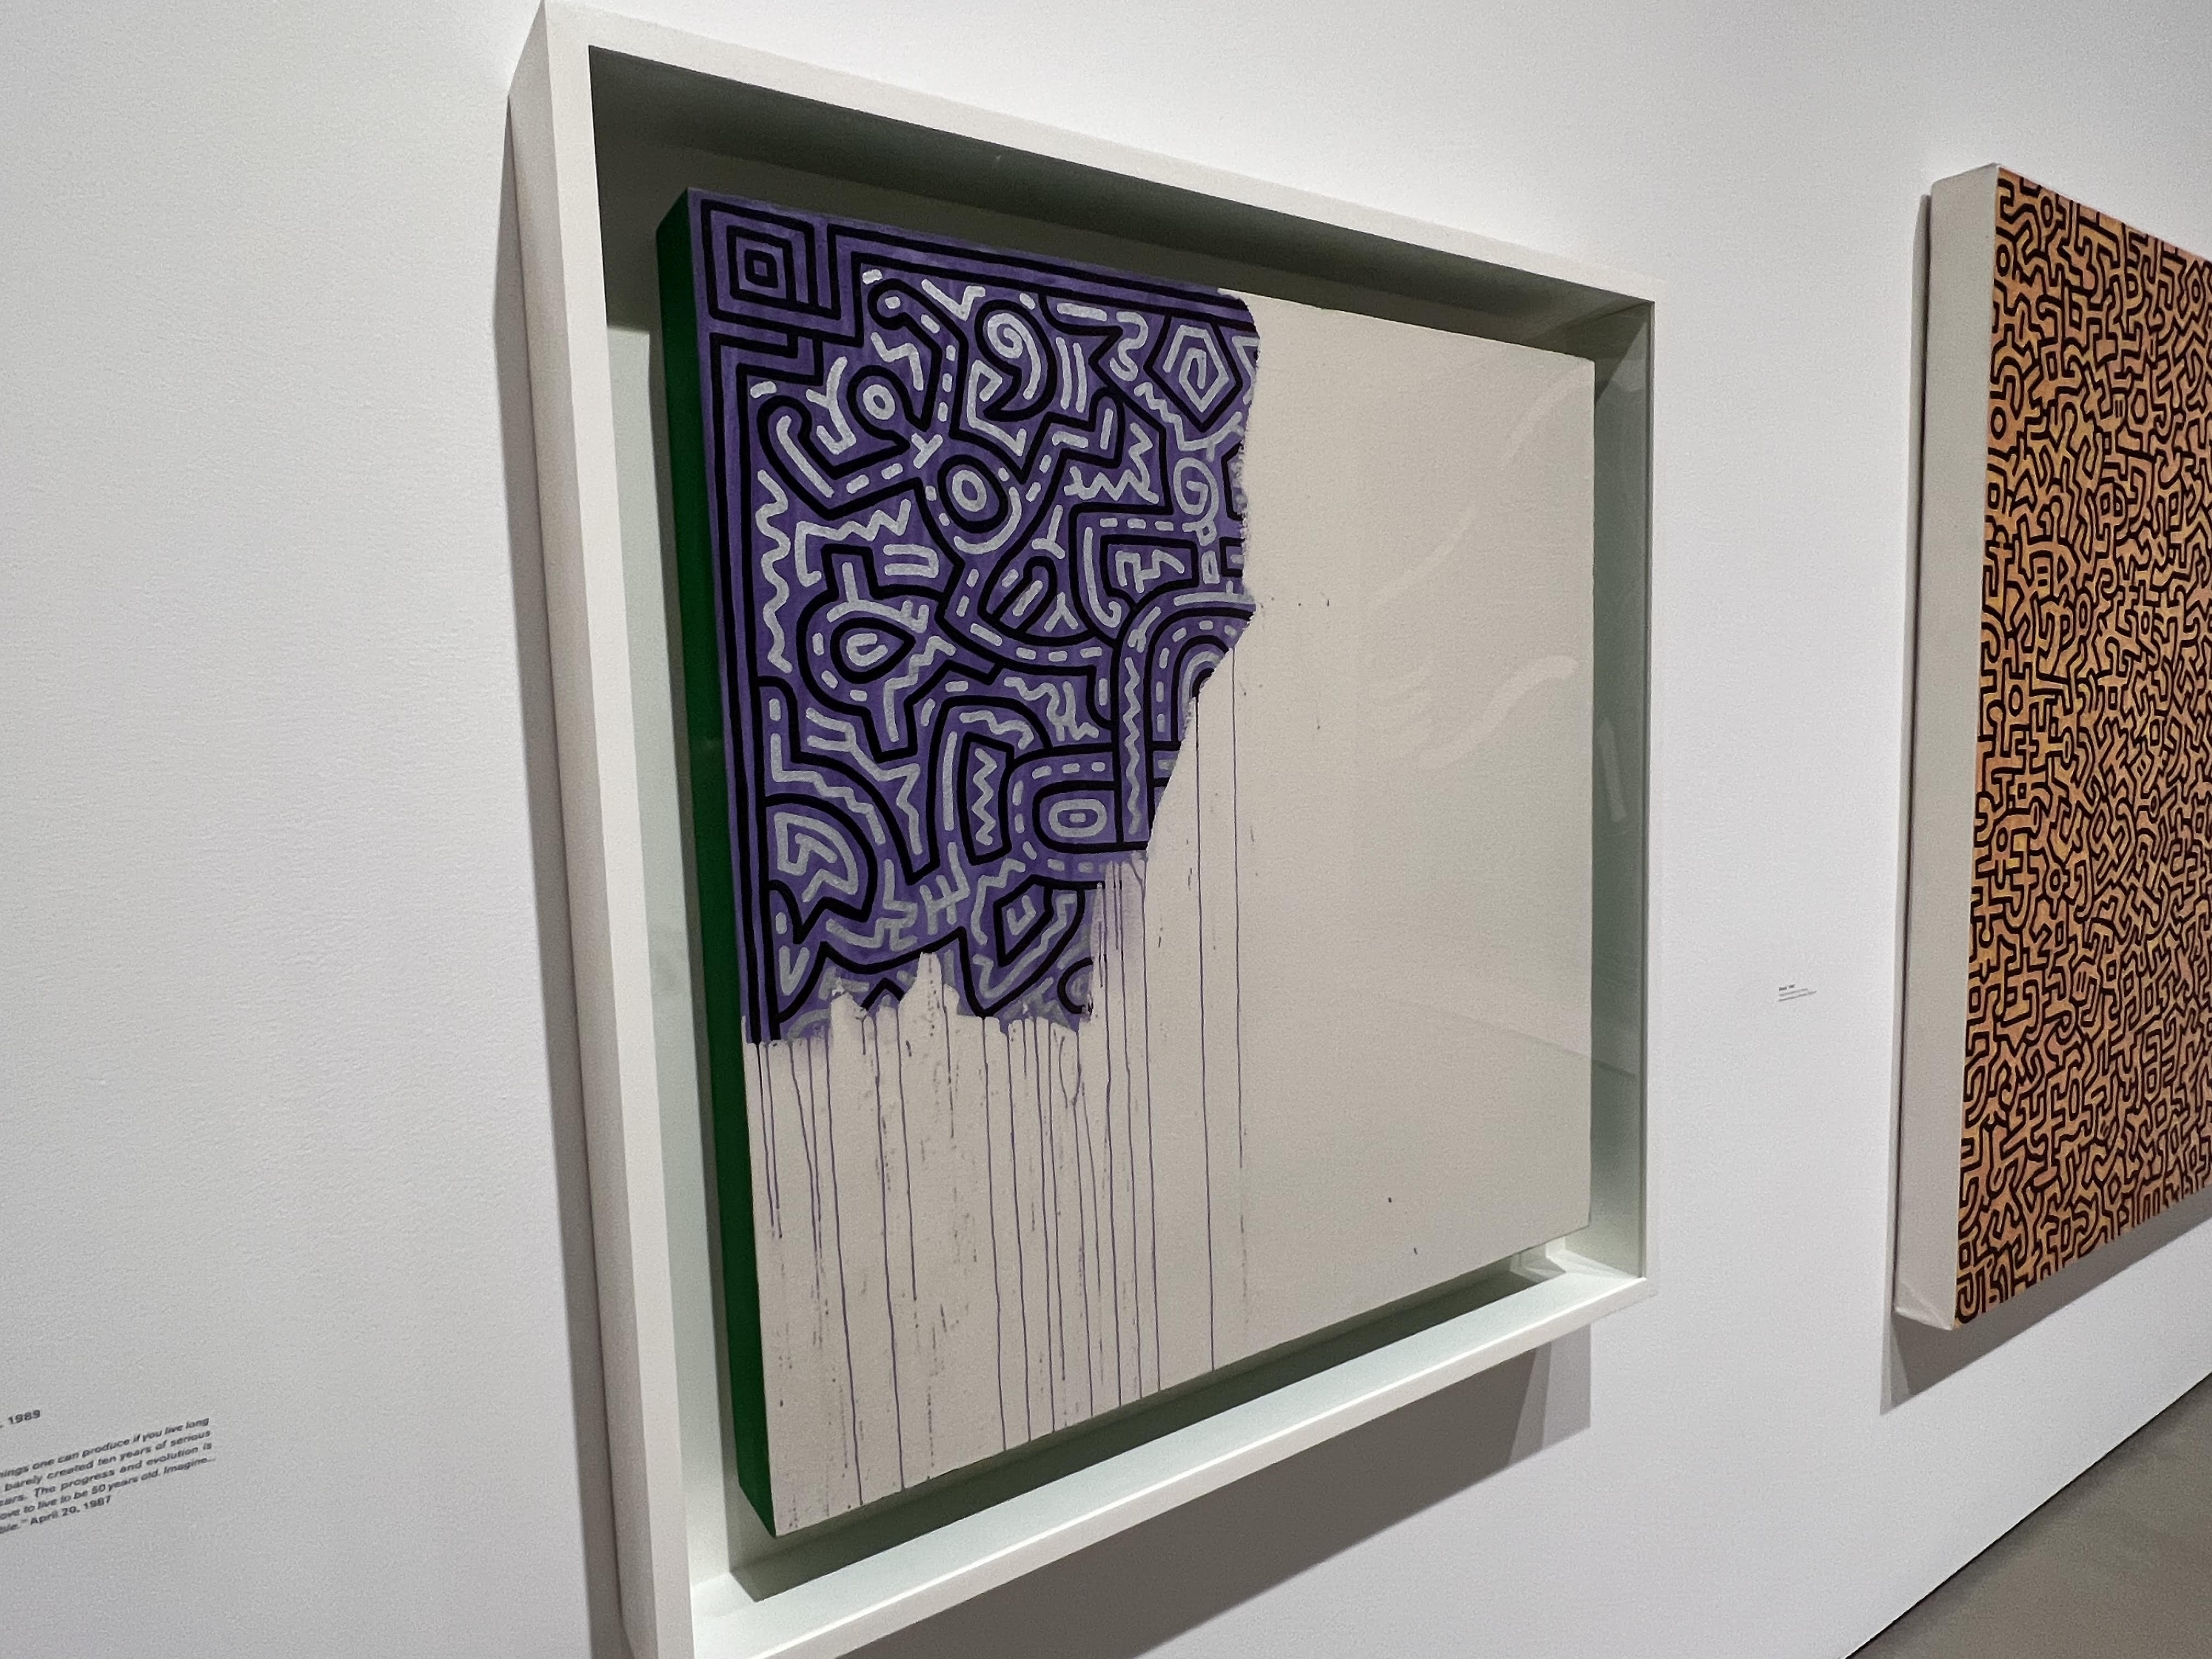 Figure 2: An unfinished work by Keith Haring 